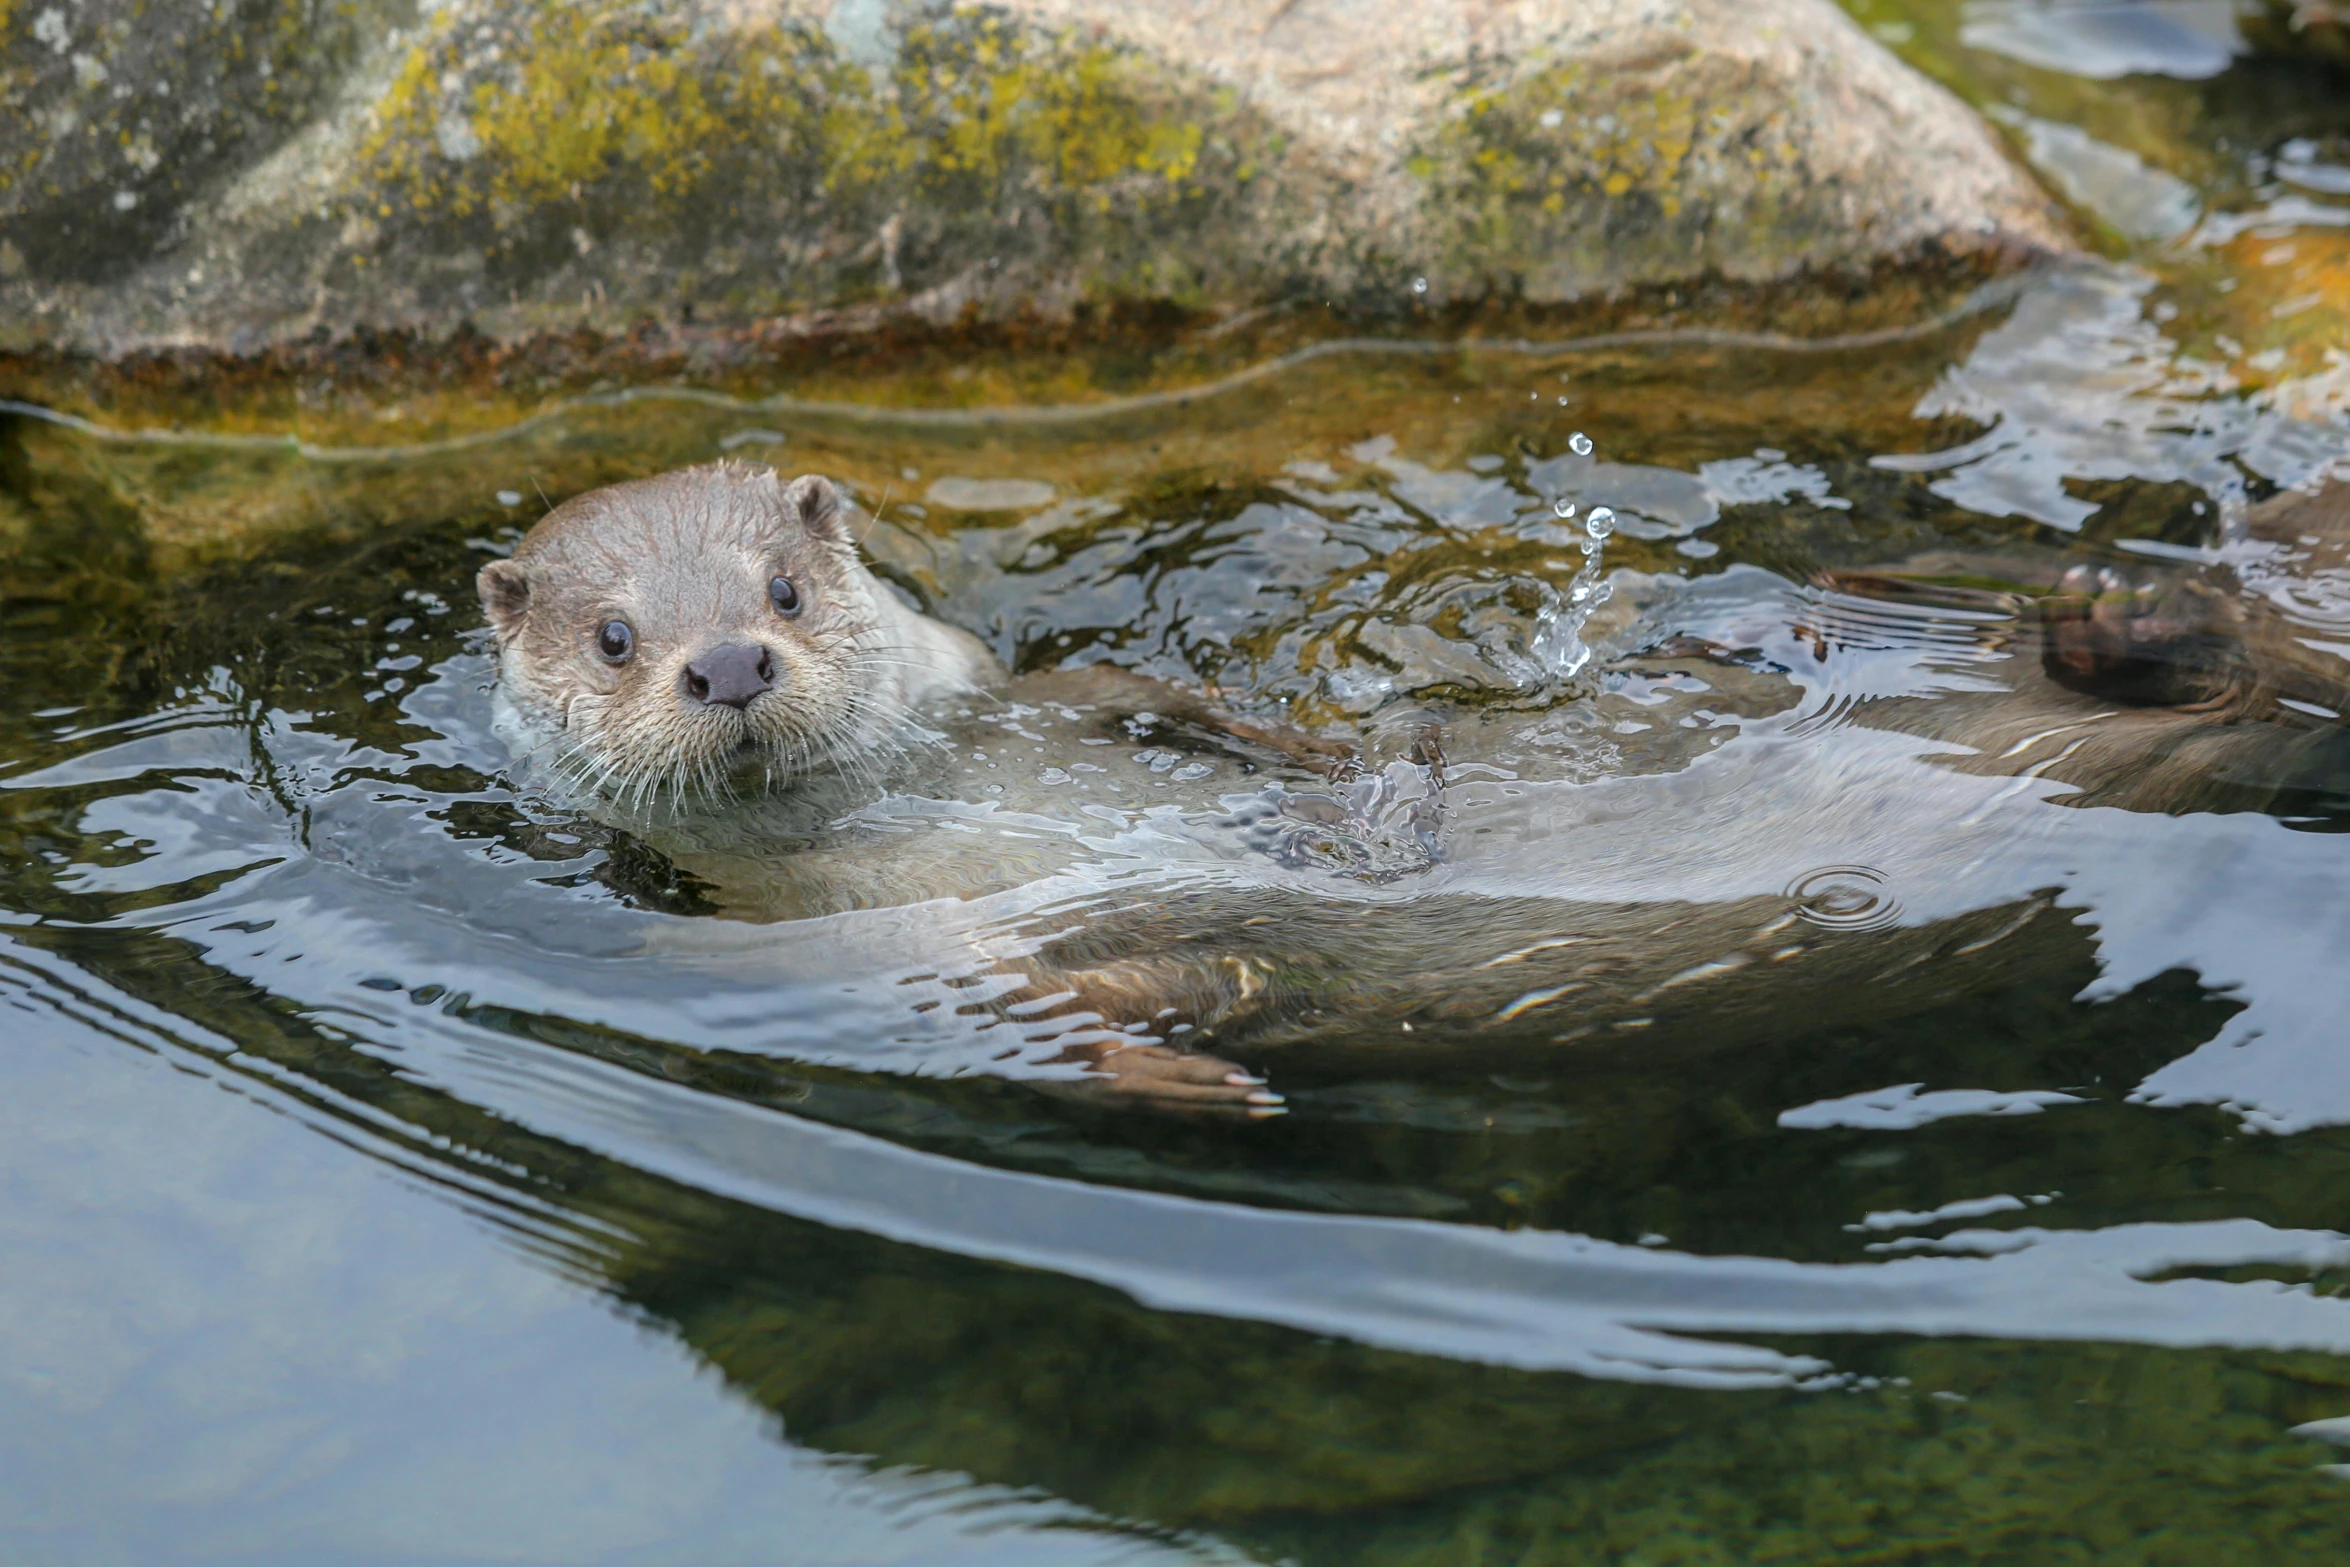 the otter is floating next to a large rock